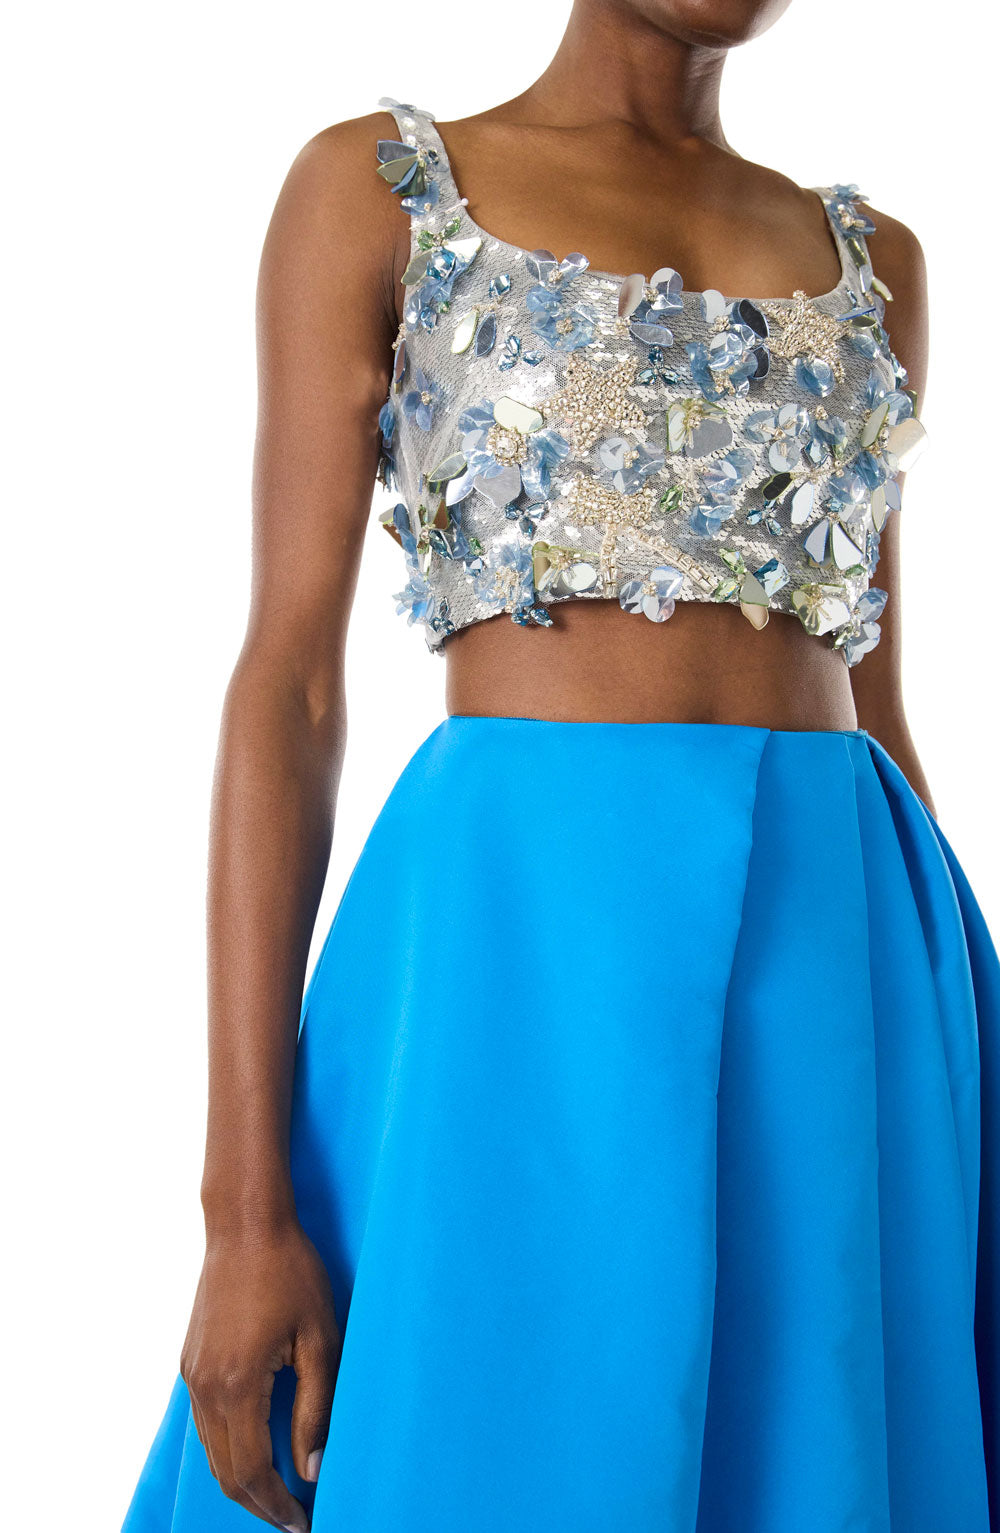 Monique Lhuillier cobalt blue silk faille ballgown skirt with pockets and high slit.  Shown with a silver embroidered crop top.